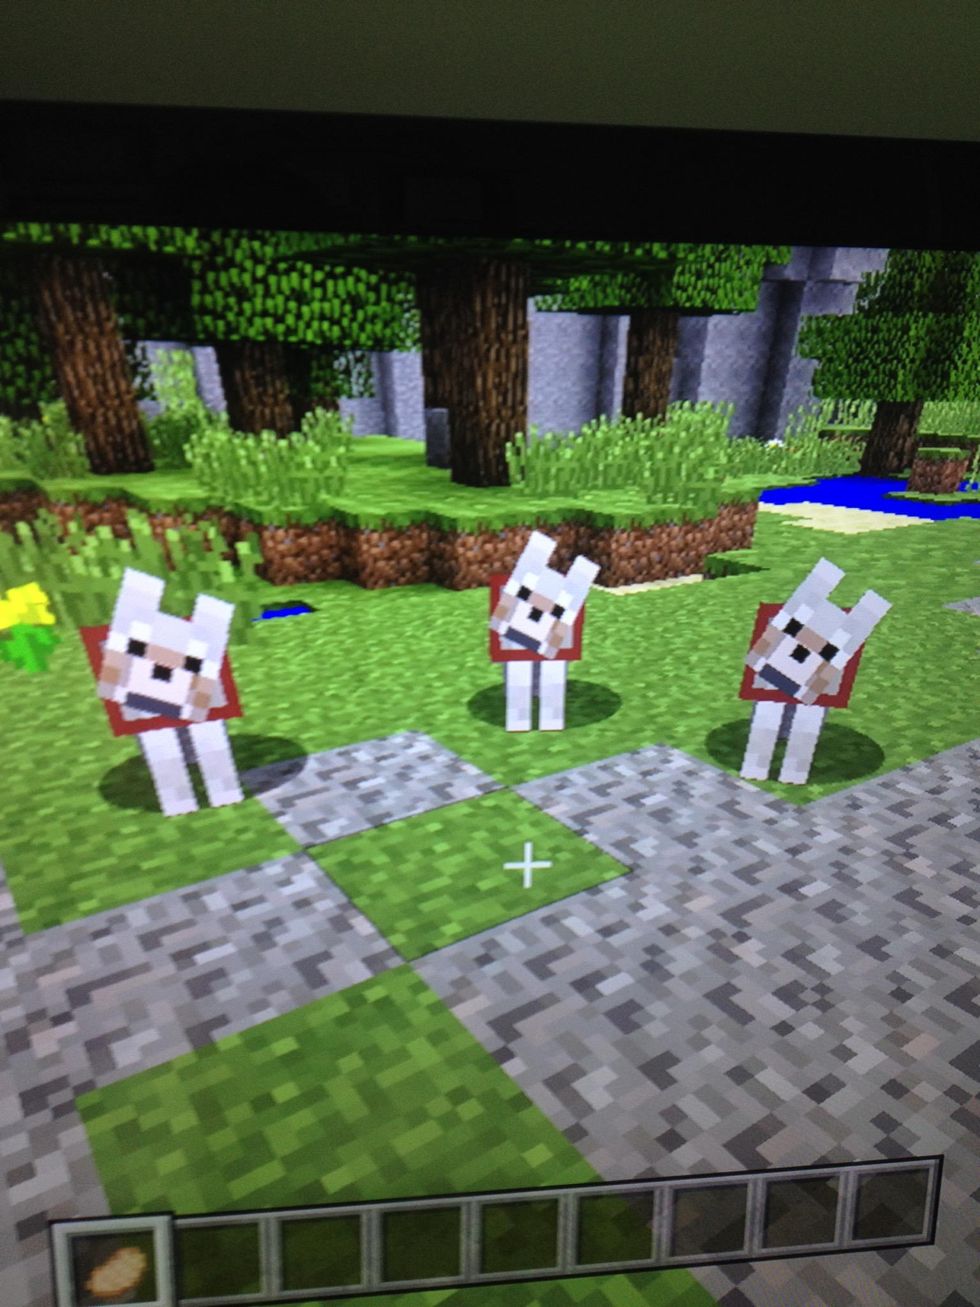 how-to-tame-a-dog-on-minecraft-ps3-version-b-c-guides